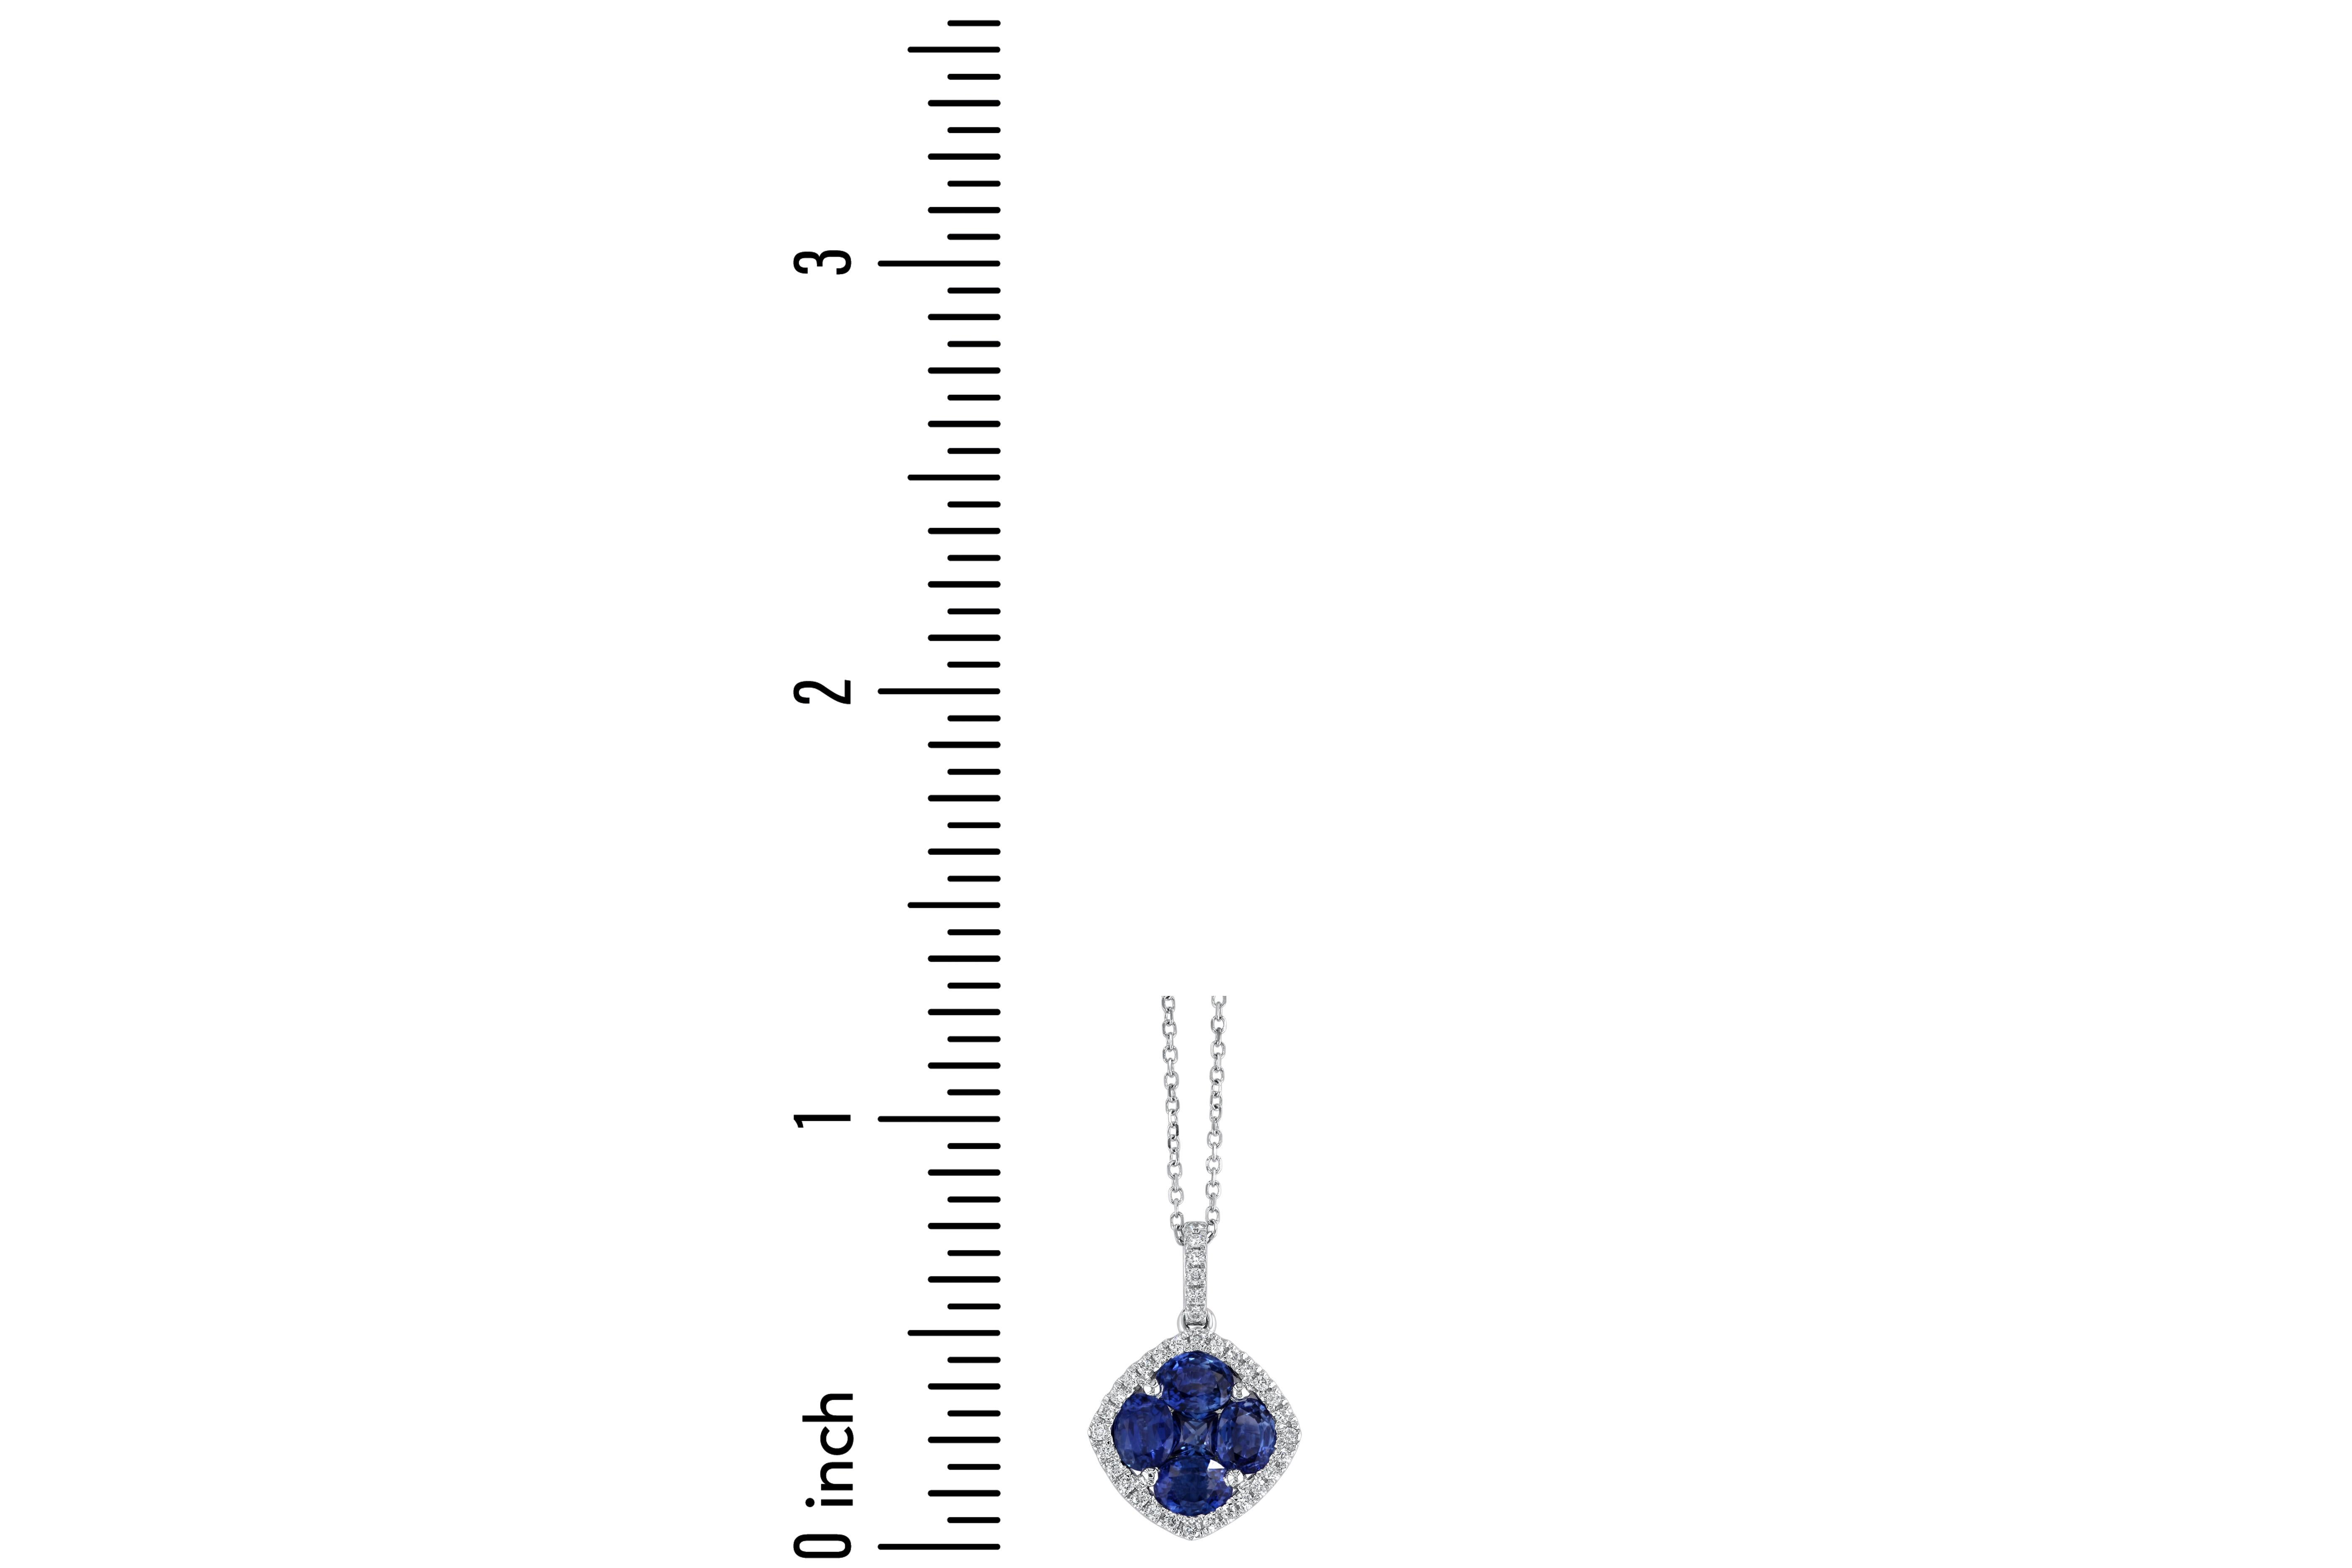 Mixed Cut 1.31 Carat Vivid Blue Sapphire and 0.13 Ct Diamond Halo Pendant in 18W ref2236 For Sale